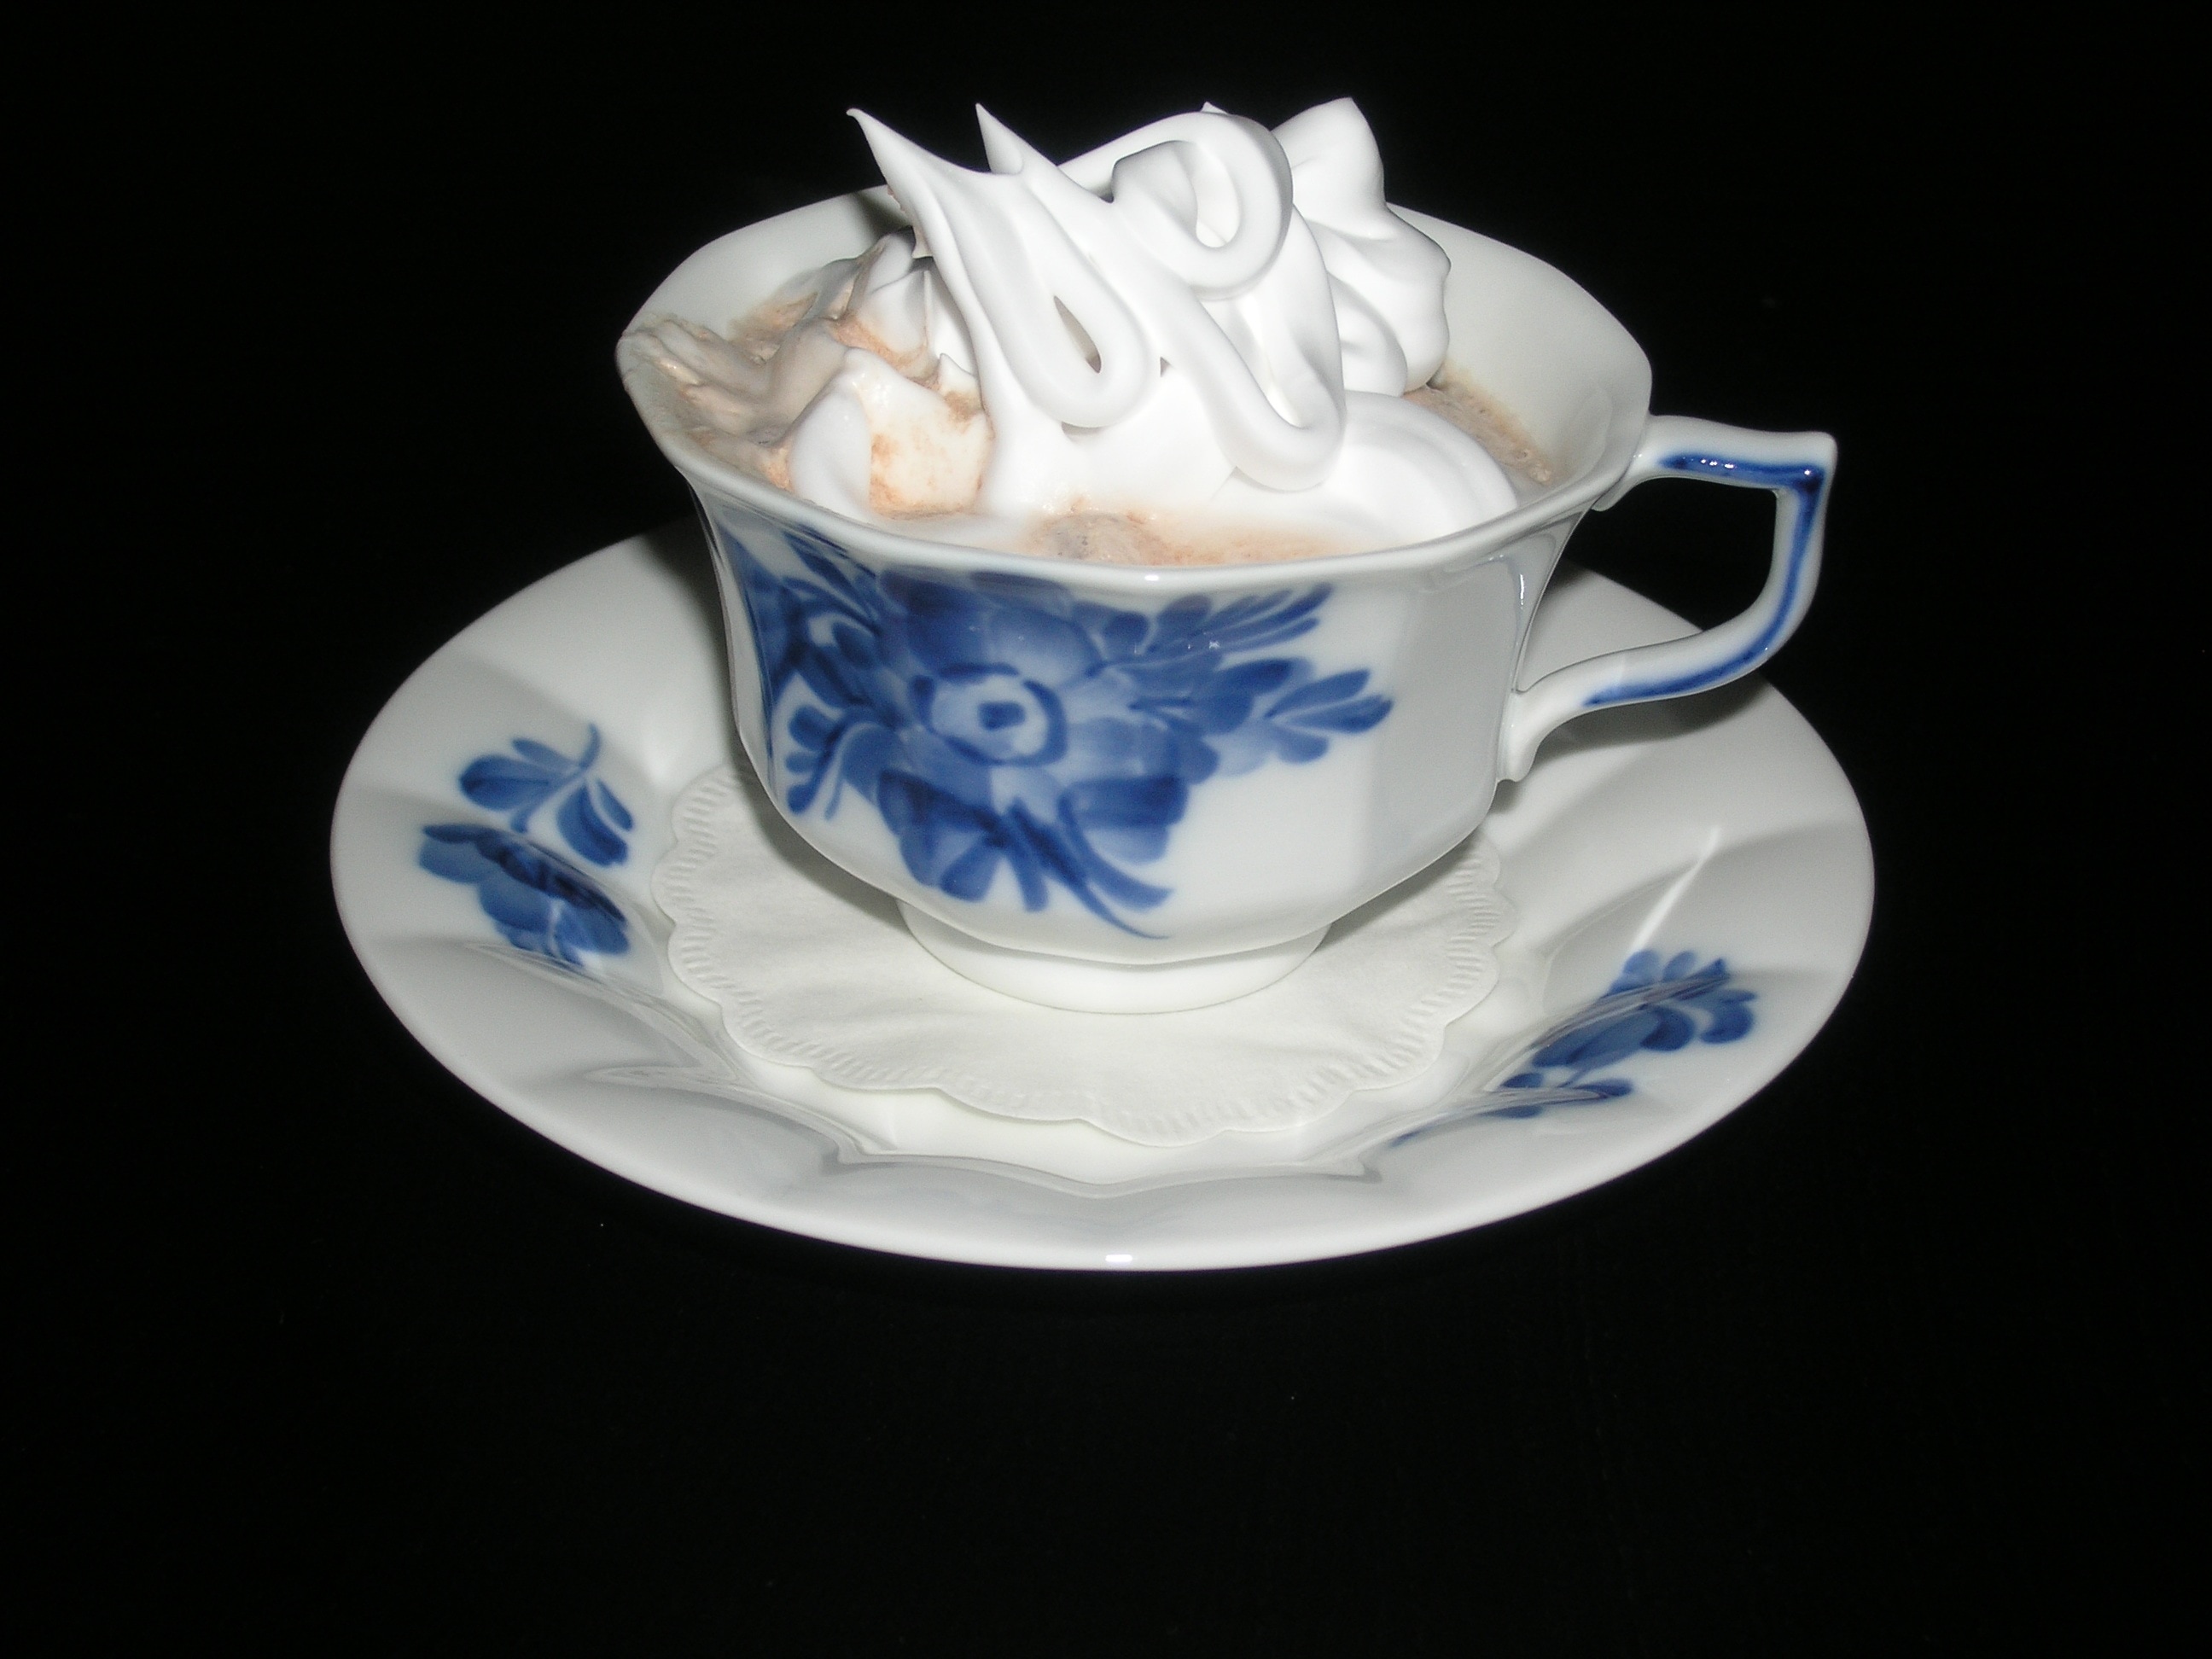 white and blue ceramic teacup and saucer